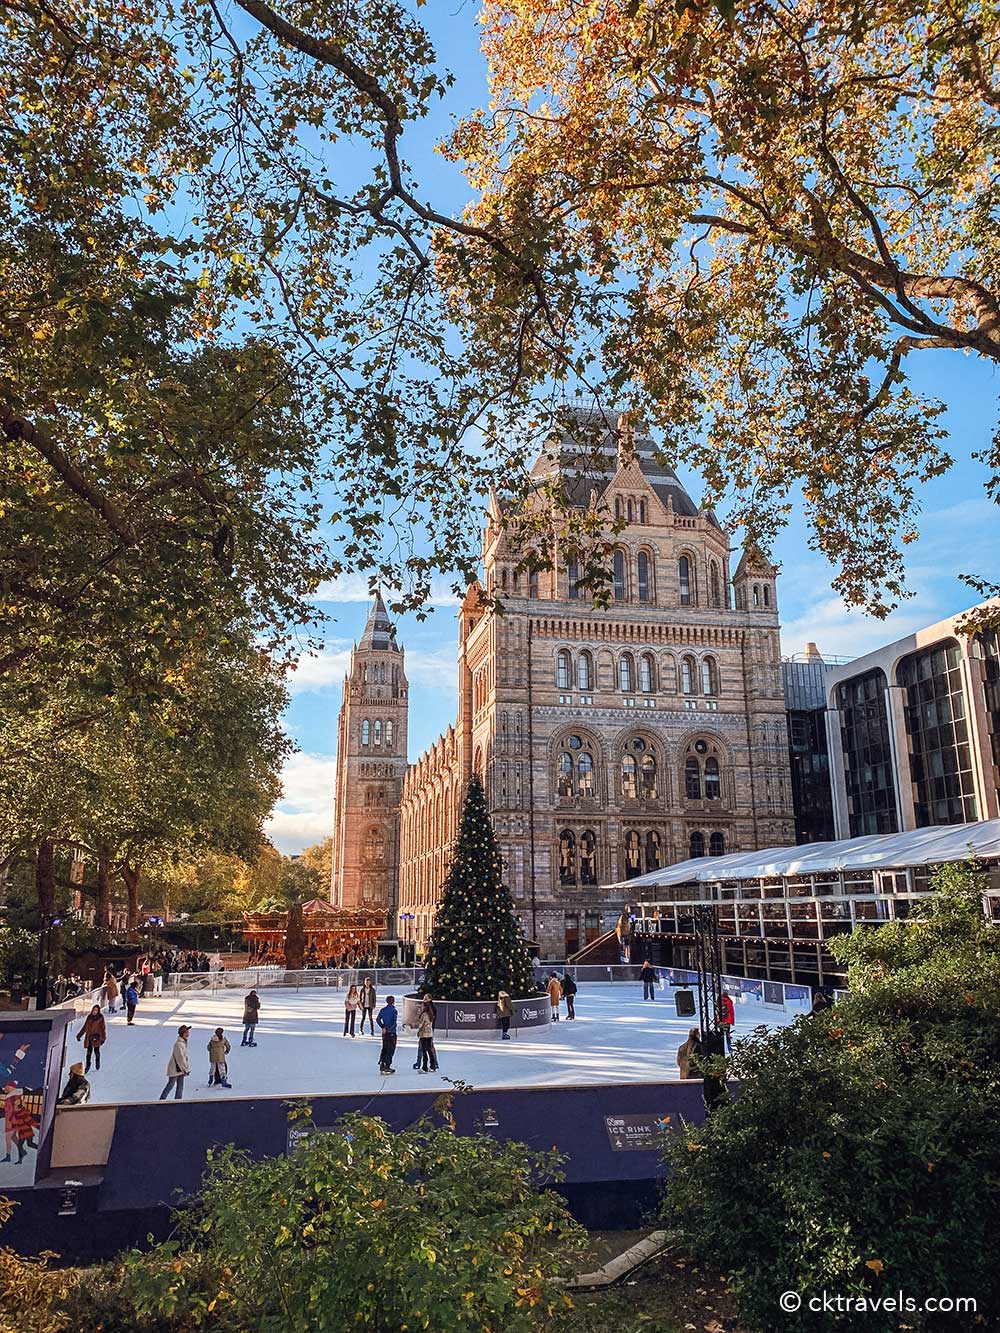 best Christmas ice skating rinks in London 2021 - Natural History museum ice rink